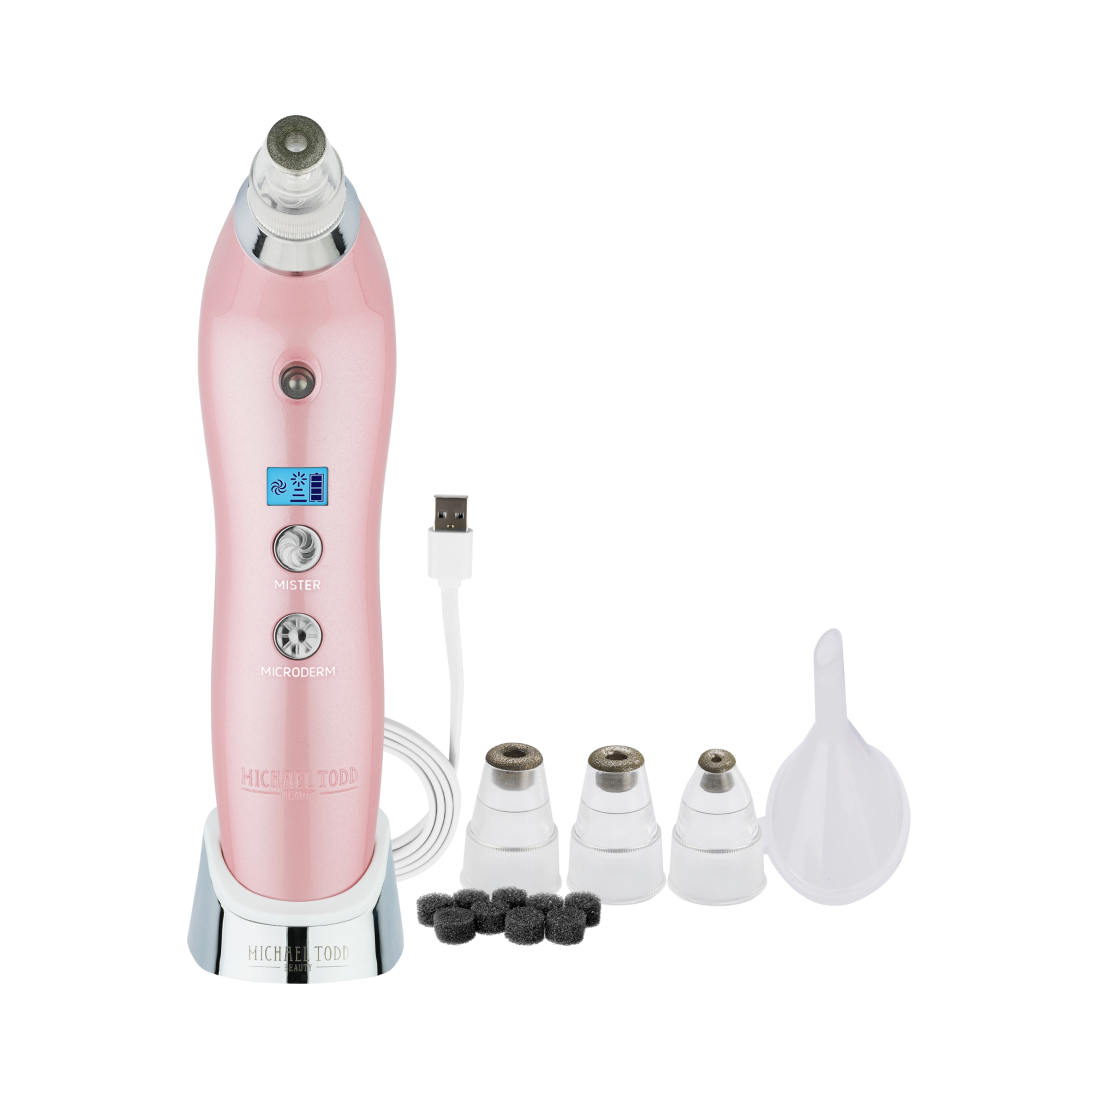 A pink Glow All Day device with buttons and a white funnel for Knú Cream application by Michael Todd Beauty.